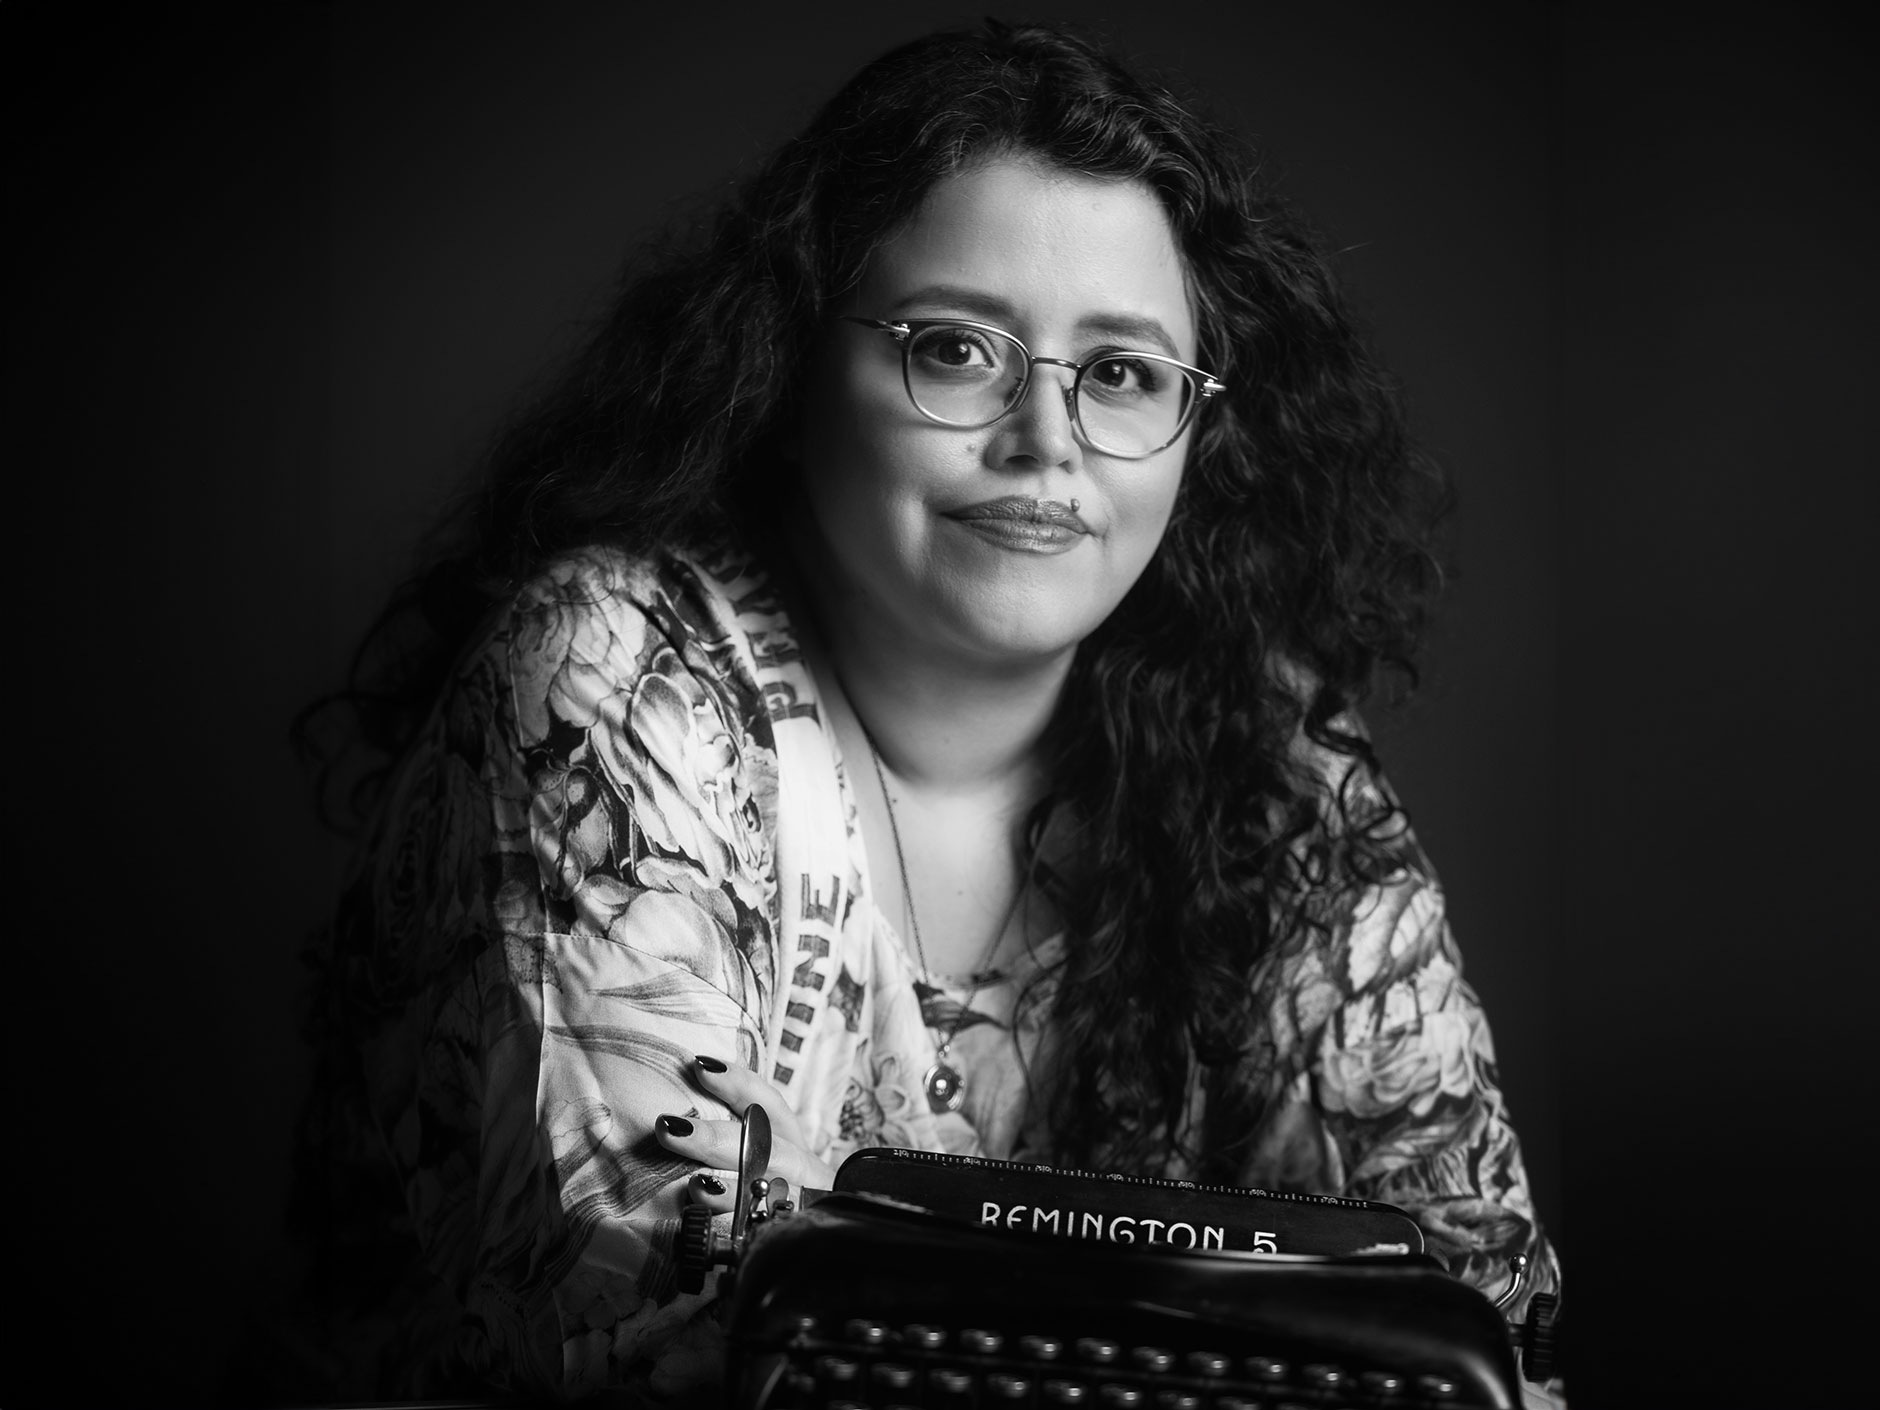 Before she made it big as an author of literary thrillers and spooky fiction, Silvia Moreno-Garcia ’03 was first a Gull, majoring in communications, working her way through college as a Resident Assistant in one of Endicott College’s purportedly haunted houses. 